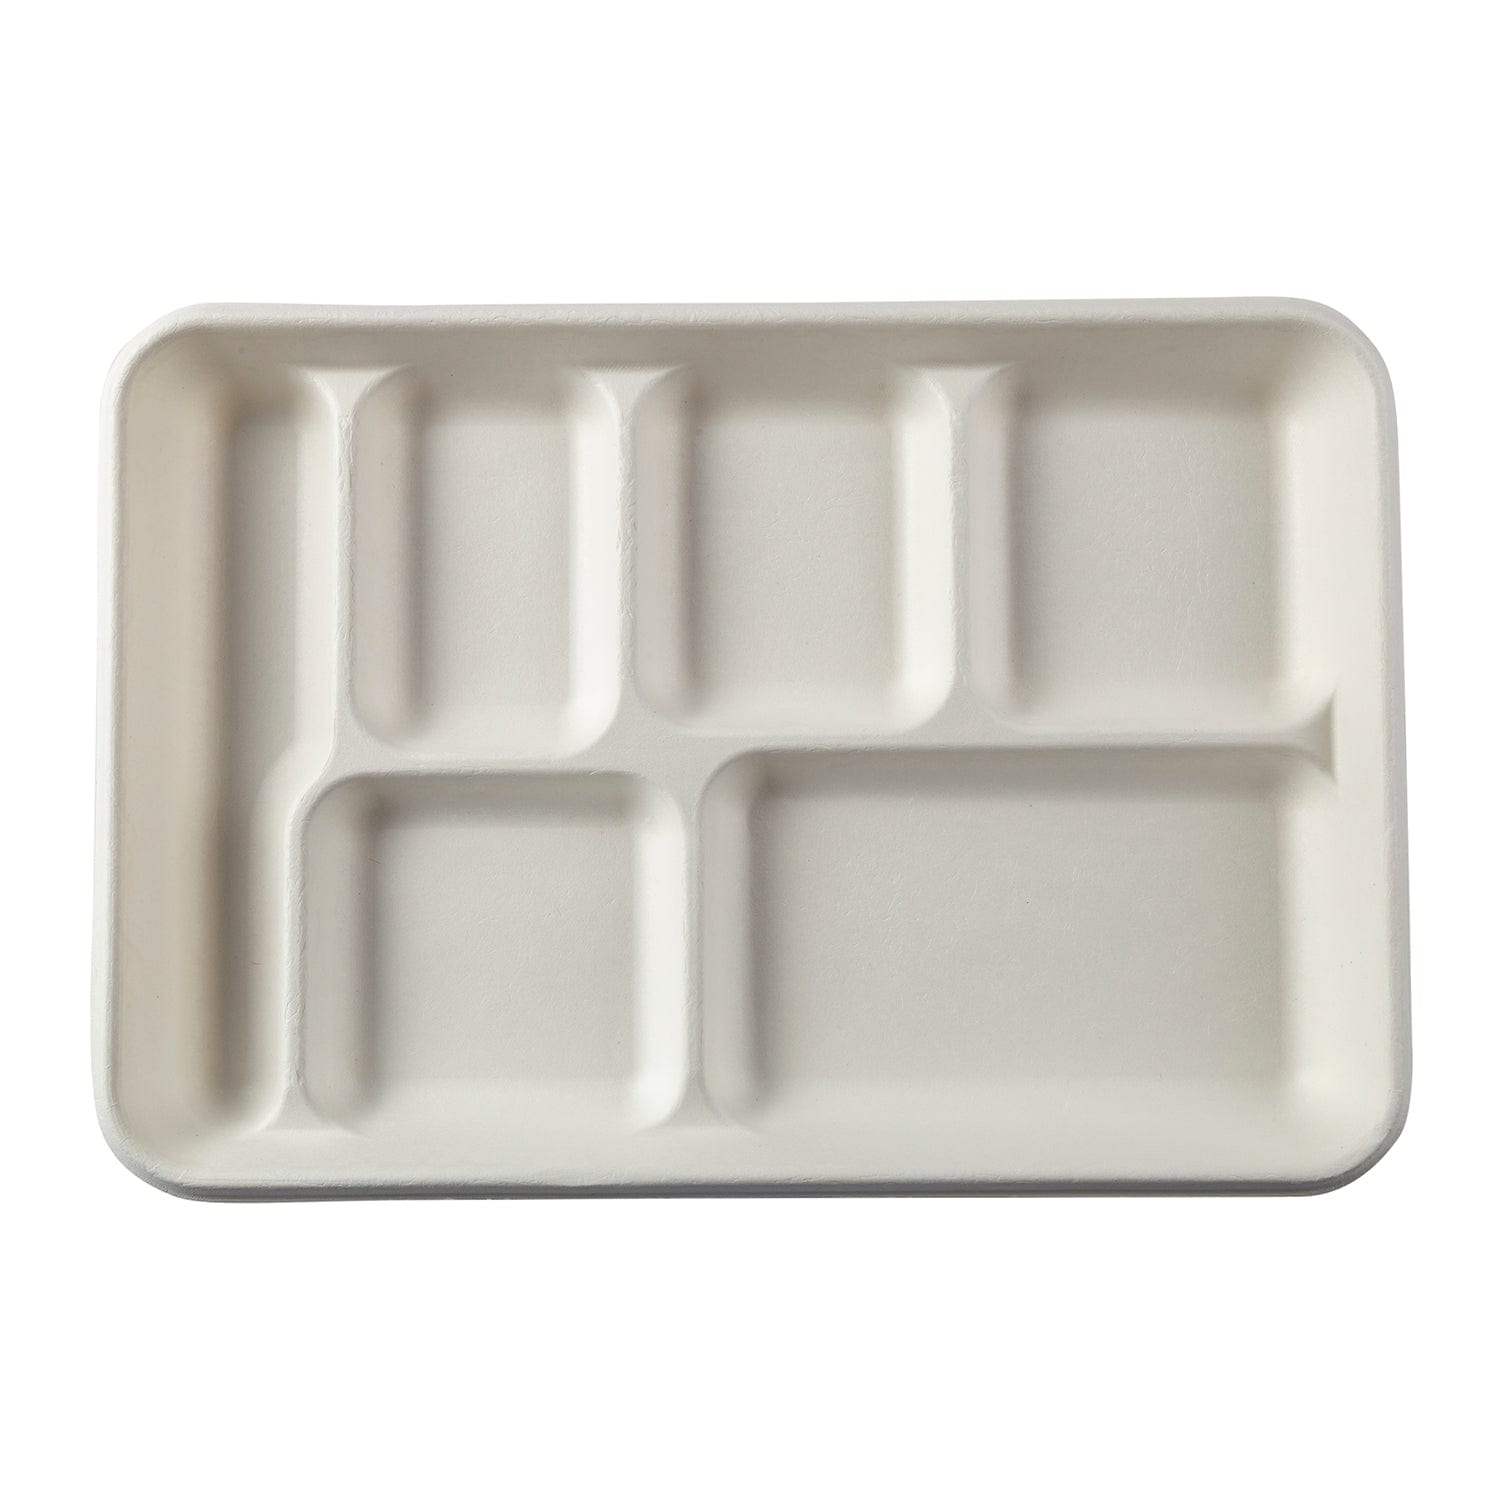 Compostable School Lunch Trays